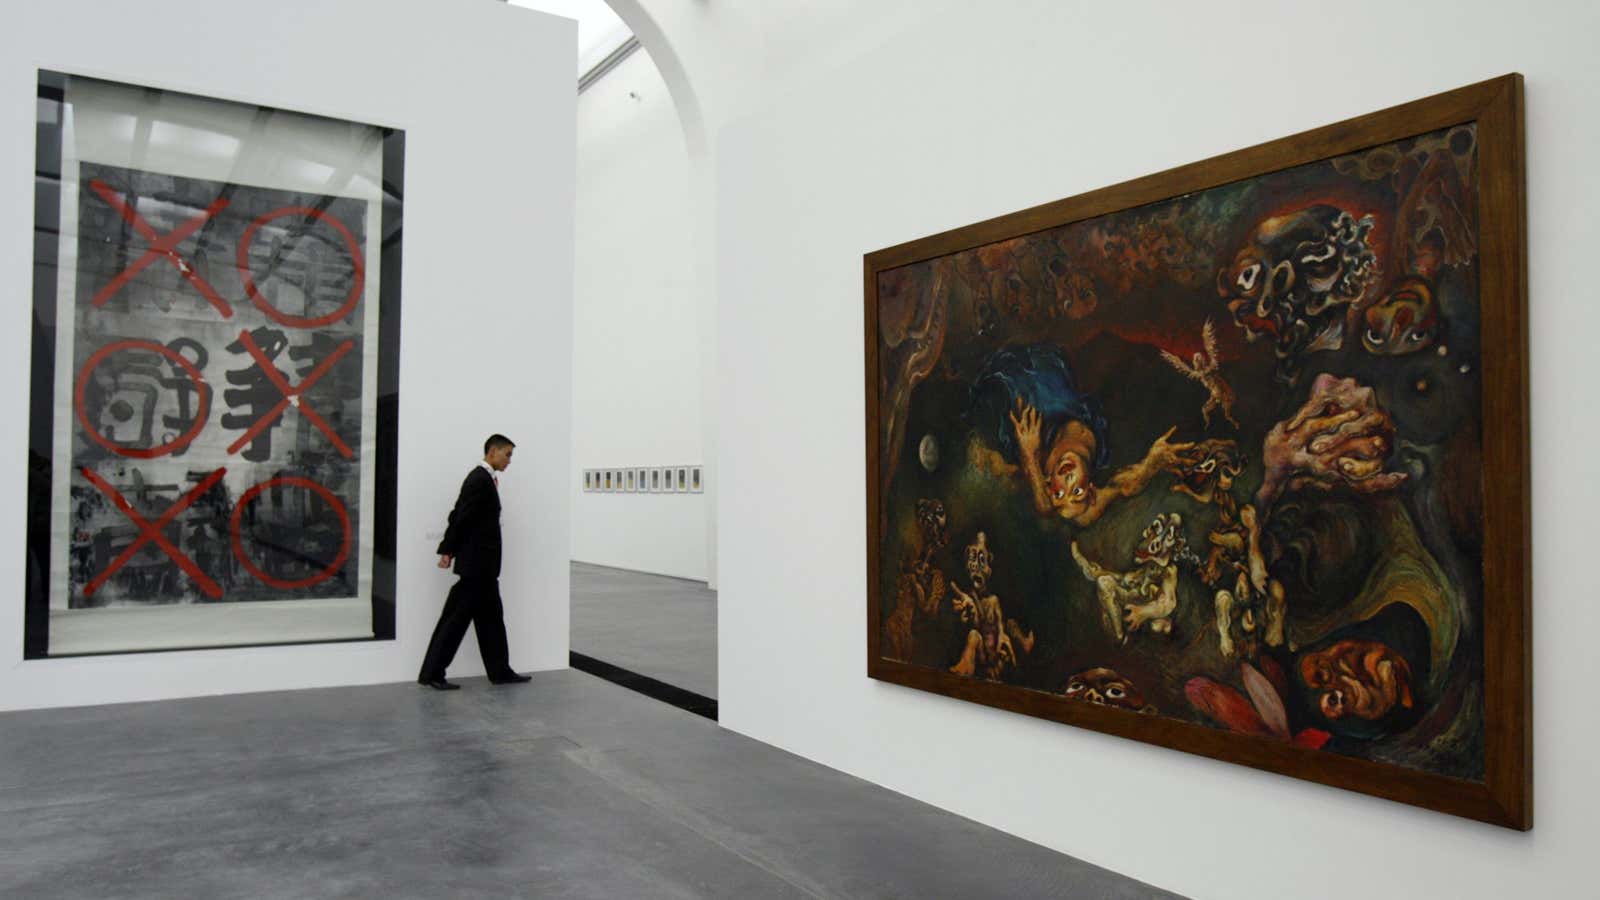 A visitor walks past works of Chinese artists displayed at Ullens Center for Contemporary Art (UCCA).